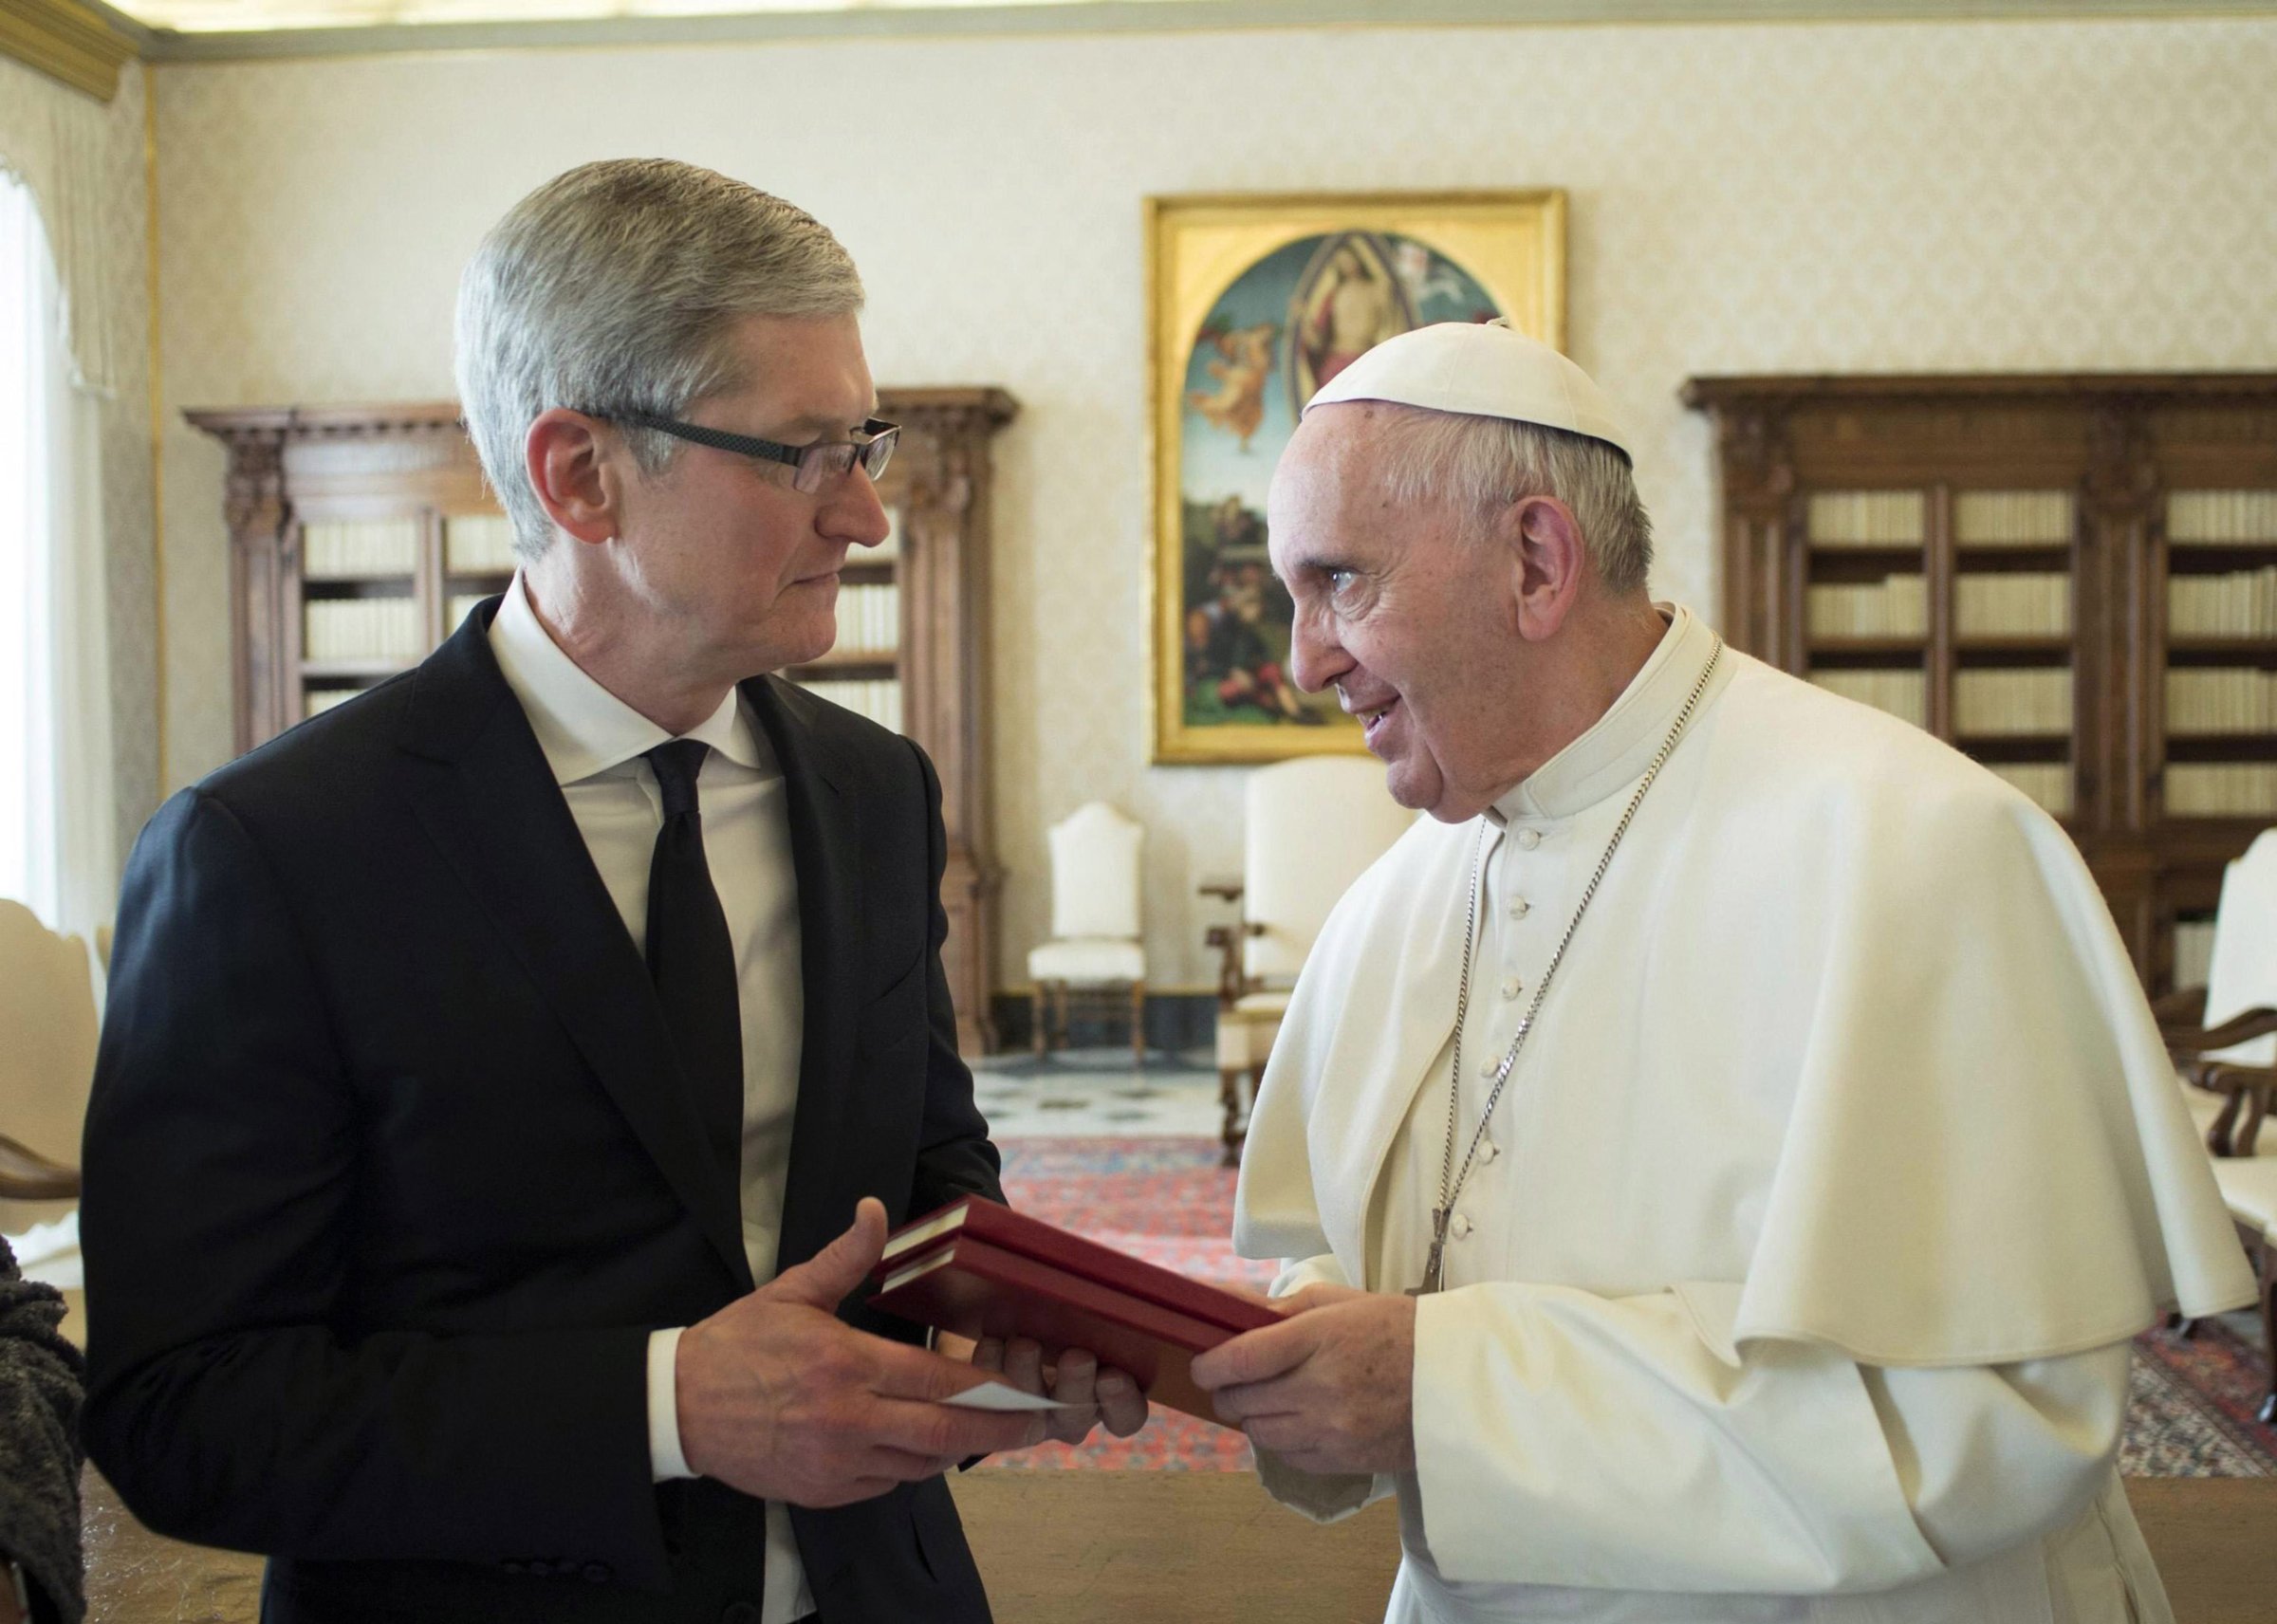 epa05118464 A handout picture released by Vatican newspaper L'Osservatore Romano of Pope Francis (R) talks with Apple CEO Tim Cook during a private audience in the Vatican, 22 January 2016. Cook is in Italy to present the creation of Apple's new iOS App Development Center in Naples to give students practical skills and training in developing applications for the hardware and software giant's operating system for mobile devices. EPA/OSSERVATORE ROMANO / HANDOUT HANDOUT EDITORIAL USE ONLY/NO SALES